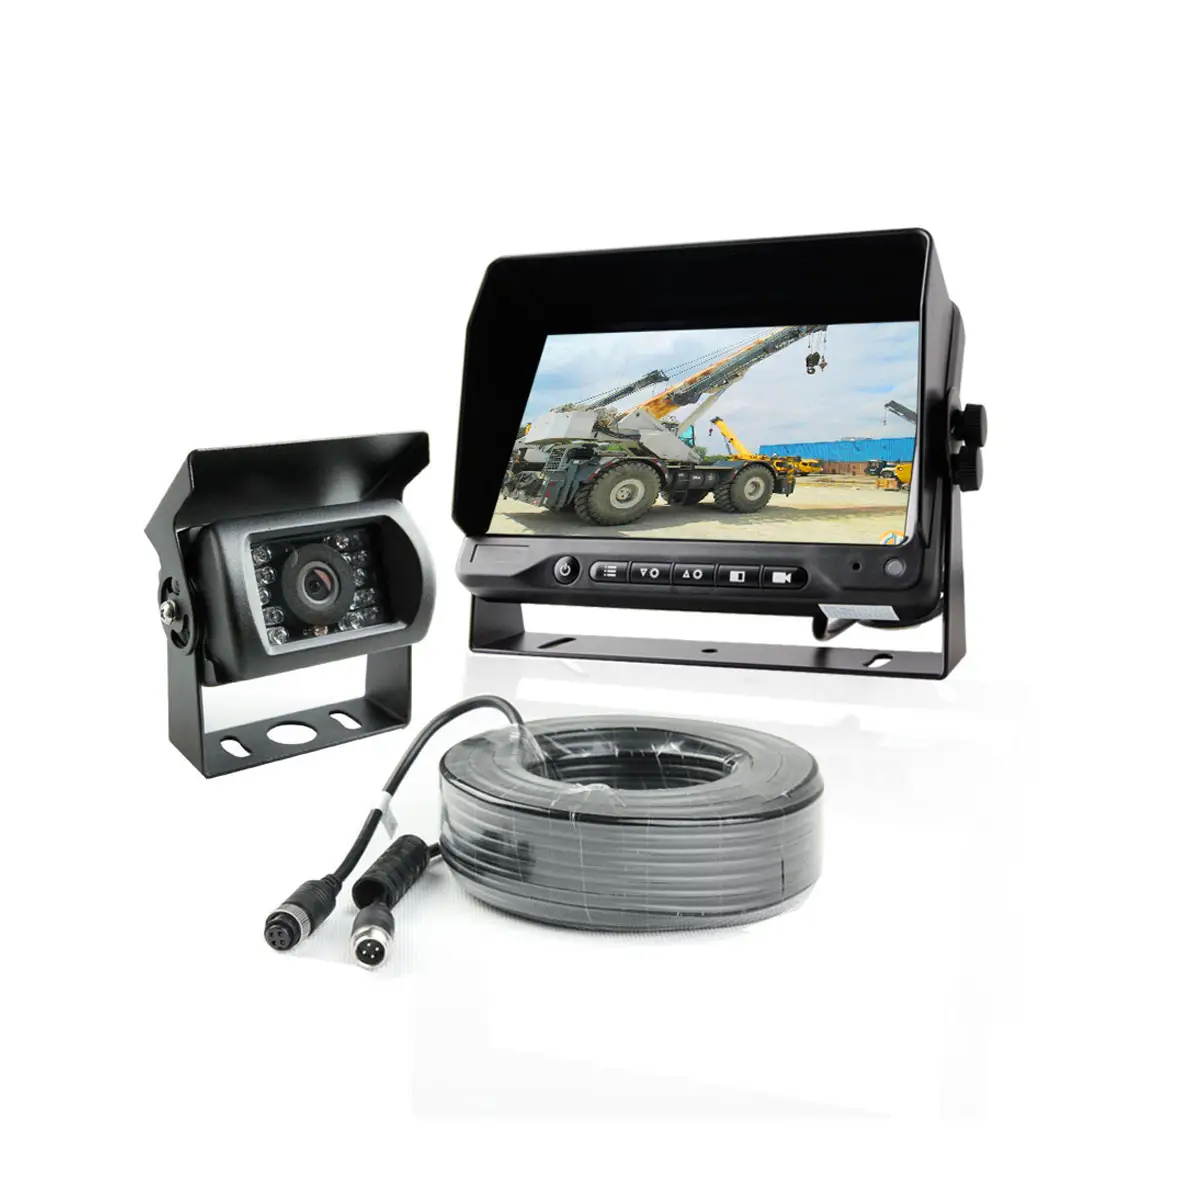 7 Inch Display RV Truck Bus Back Camera Truck Camera Rear View System